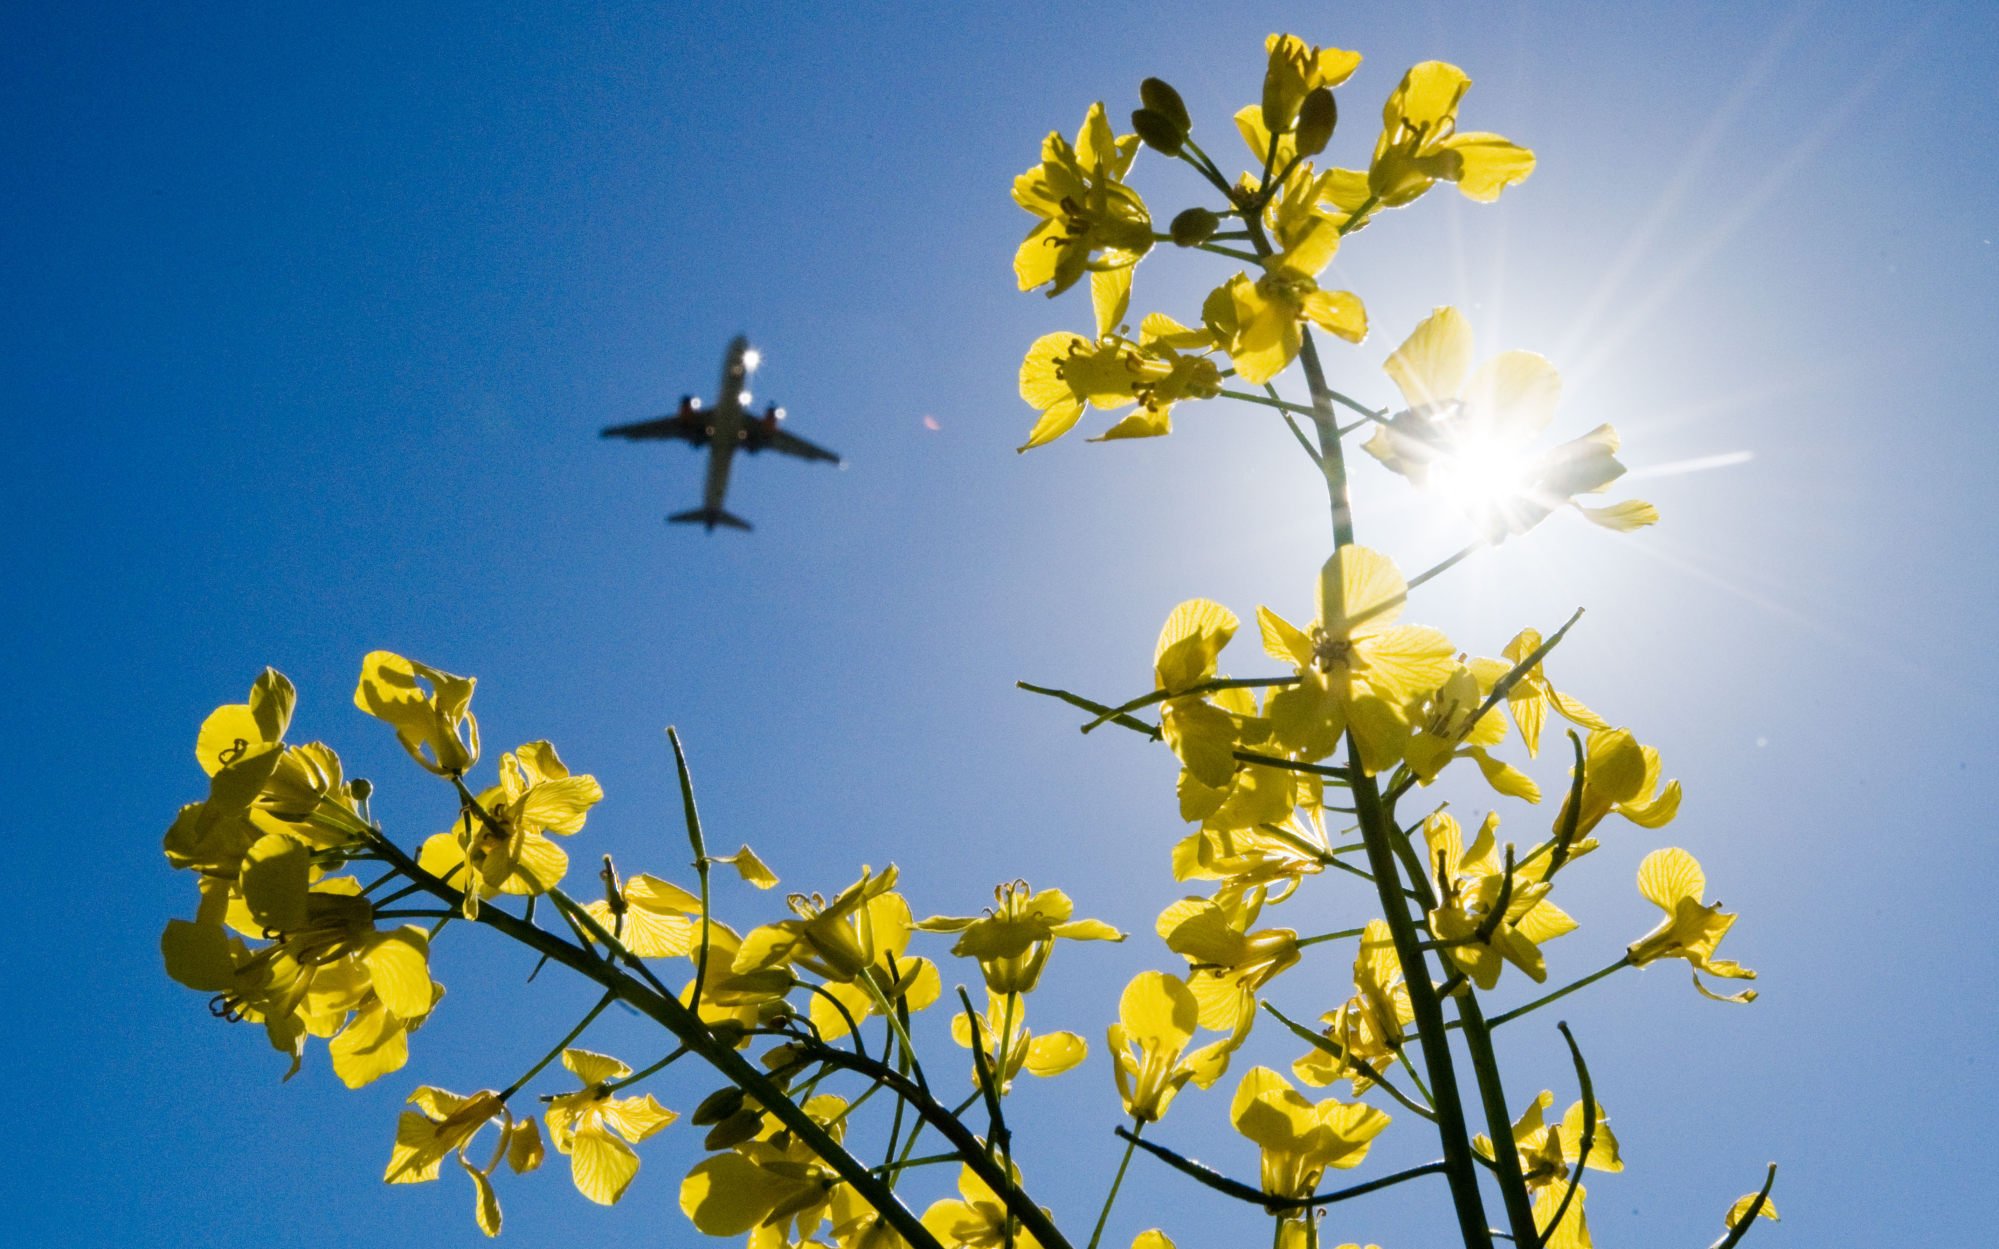 will carbon cost of flights to australasia put off long-haul tourists? is great barrier reef bleaching a turn-off too?